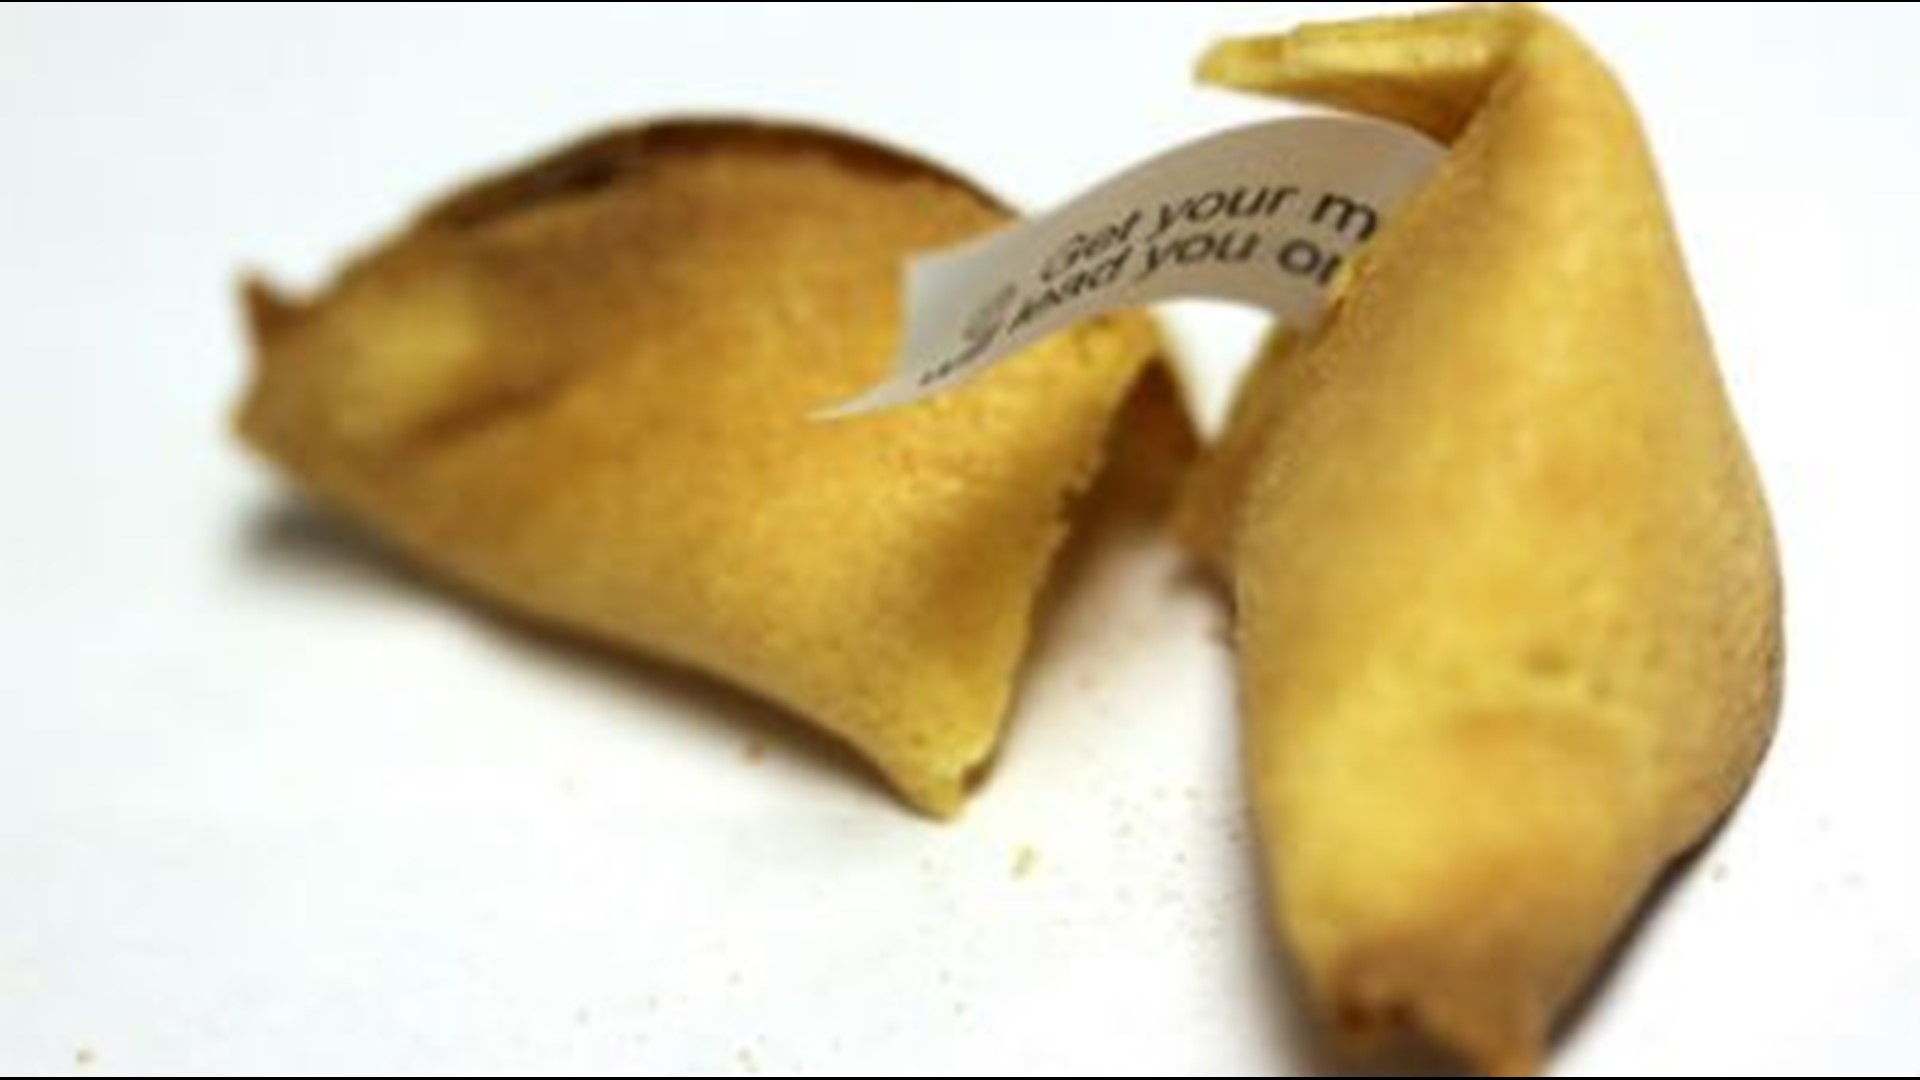 July 20 National Fortune Cookie Day